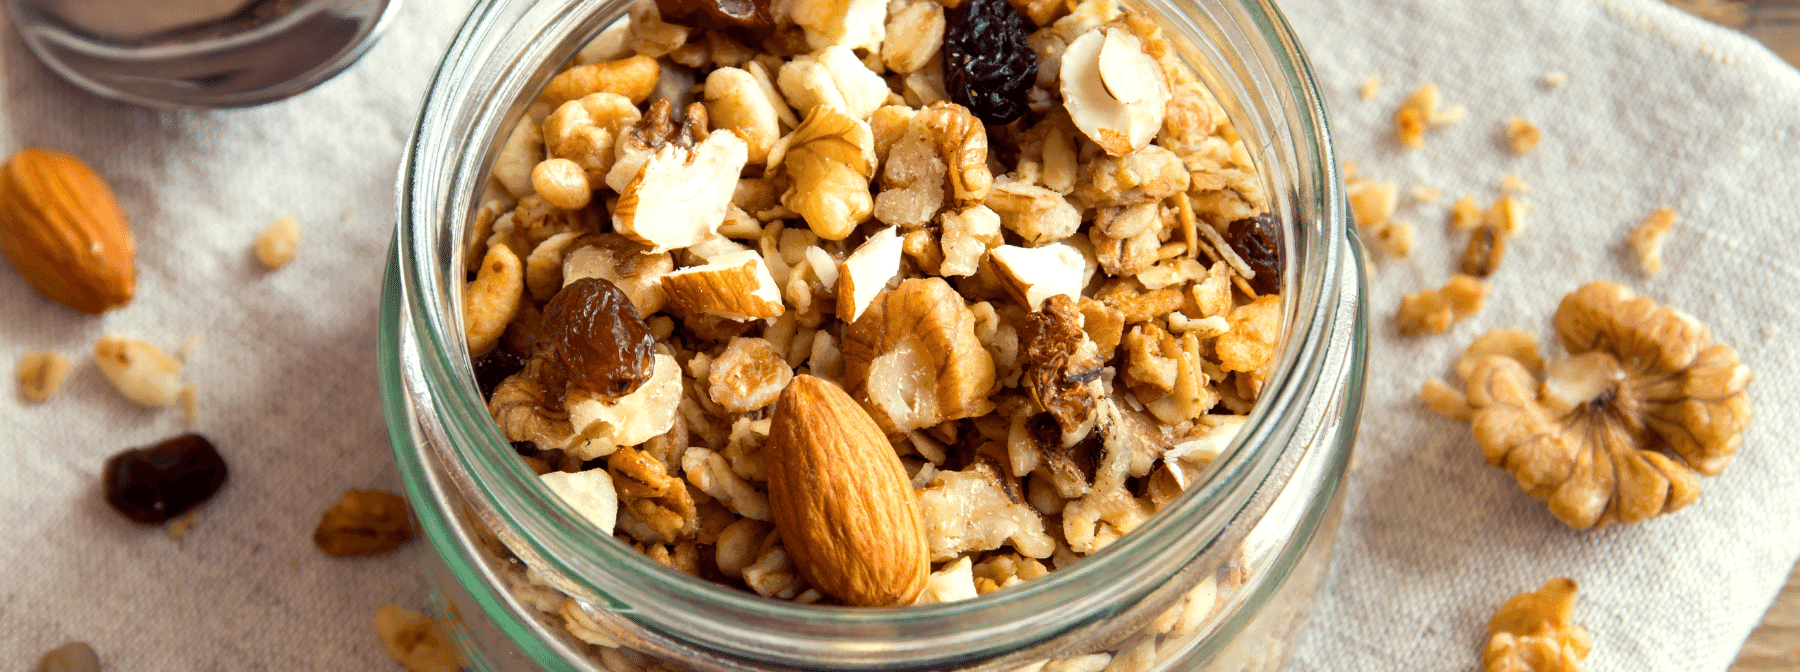 10 Healthy Snacks for Weight Loss